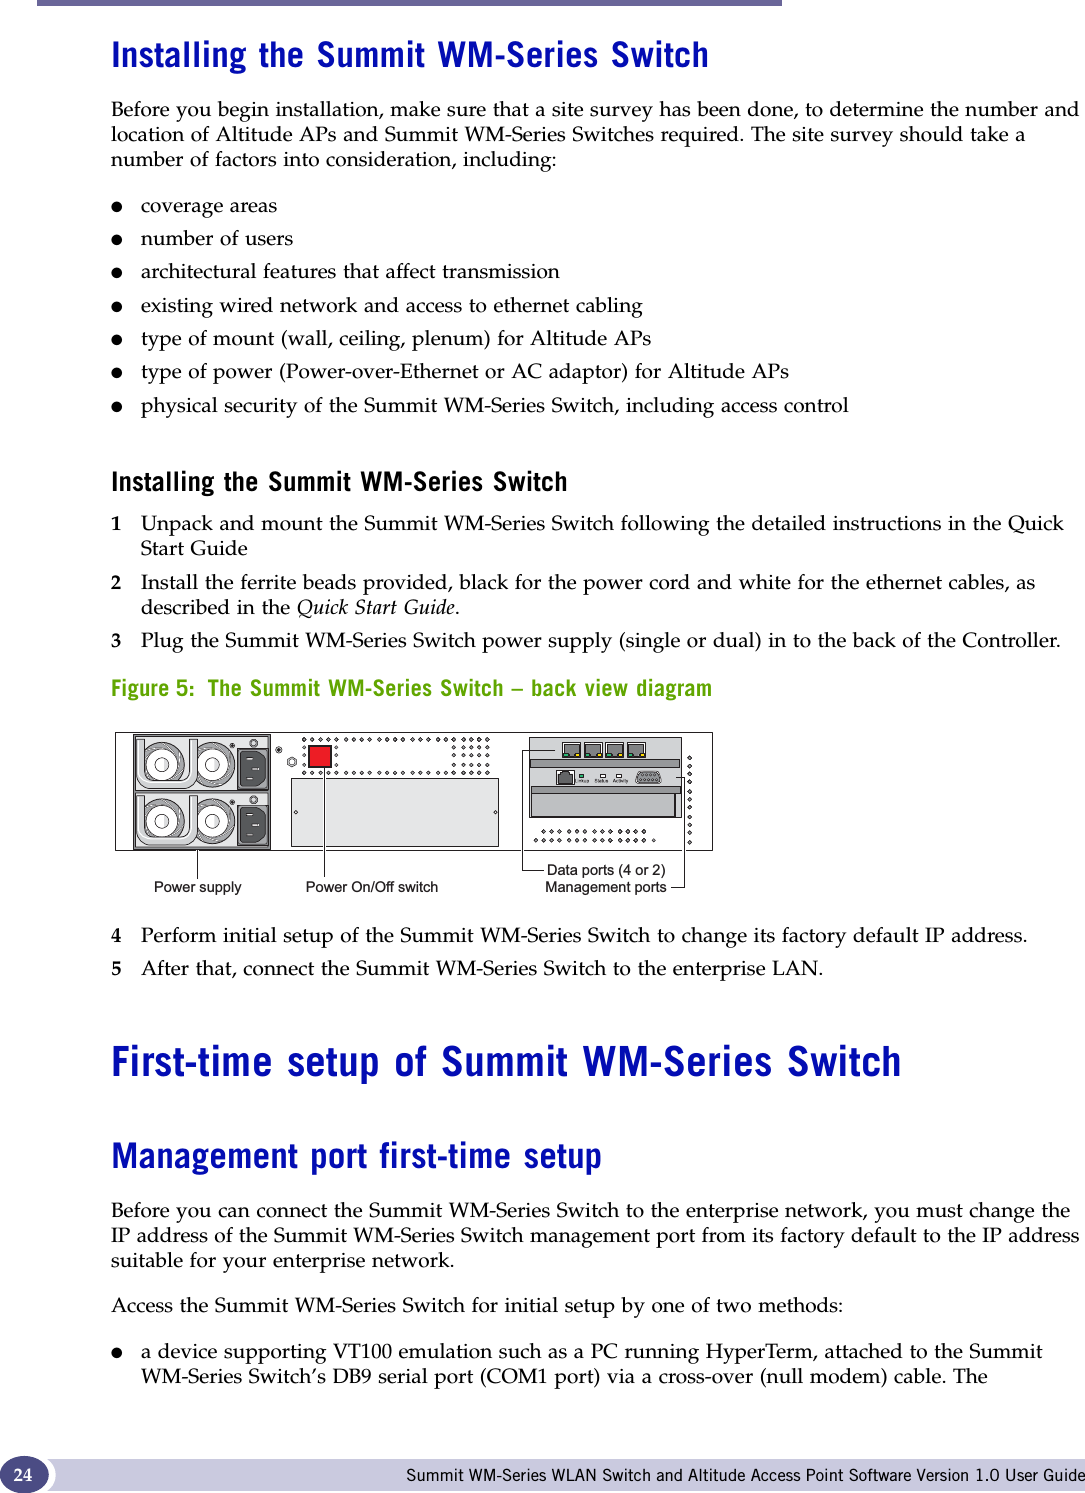 Summit WM-Series Switch: Startup Summit WM-Series WLAN Switch and Altitude Access Point Software Version 1.0 User Guide24Installing the Summit WM-Series SwitchBefore you begin installation, make sure that a site survey has been done, to determine the number and location of Altitude APs and Summit WM-Series Switches required. The site survey should take a number of factors into consideration, including:●coverage areas●number of users●architectural features that affect transmission●existing wired network and access to ethernet cabling●type of mount (wall, ceiling, plenum) for Altitude APs●type of power (Power-over-Ethernet or AC adaptor) for Altitude APs●physical security of the Summit WM-Series Switch, including access controlInstalling the Summit WM-Series Switch1Unpack and mount the Summit WM-Series Switch following the detailed instructions in the Quick Start Guide2Install the ferrite beads provided, black for the power cord and white for the ethernet cables, as described in the Quick Start Guide.3Plug the Summit WM-Series Switch power supply (single or dual) in to the back of the Controller. Figure 5: The Summit WM-Series Switch – back view diagram4Perform initial setup of the Summit WM-Series Switch to change its factory default IP address.5After that, connect the Summit WM-Series Switch to the enterprise LAN. First-time setup of Summit WM-Series SwitchManagement port first-time setupBefore you can connect the Summit WM-Series Switch to the enterprise network, you must change the IP address of the Summit WM-Series Switch management port from its factory default to the IP address suitable for your enterprise network.Access the Summit WM-Series Switch for initial setup by one of two methods:●a device supporting VT100 emulation such as a PC running HyperTerm, attached to the Summit WM-Series Switch’s DB9 serial port (COM1 port) via a cross-over (null modem) cable. The 3RZHUVXSSO\ 3RZHU2Q2IIVZLWFK&apos;DWDSRUWVRU0DQDJHPHQWSRUWV